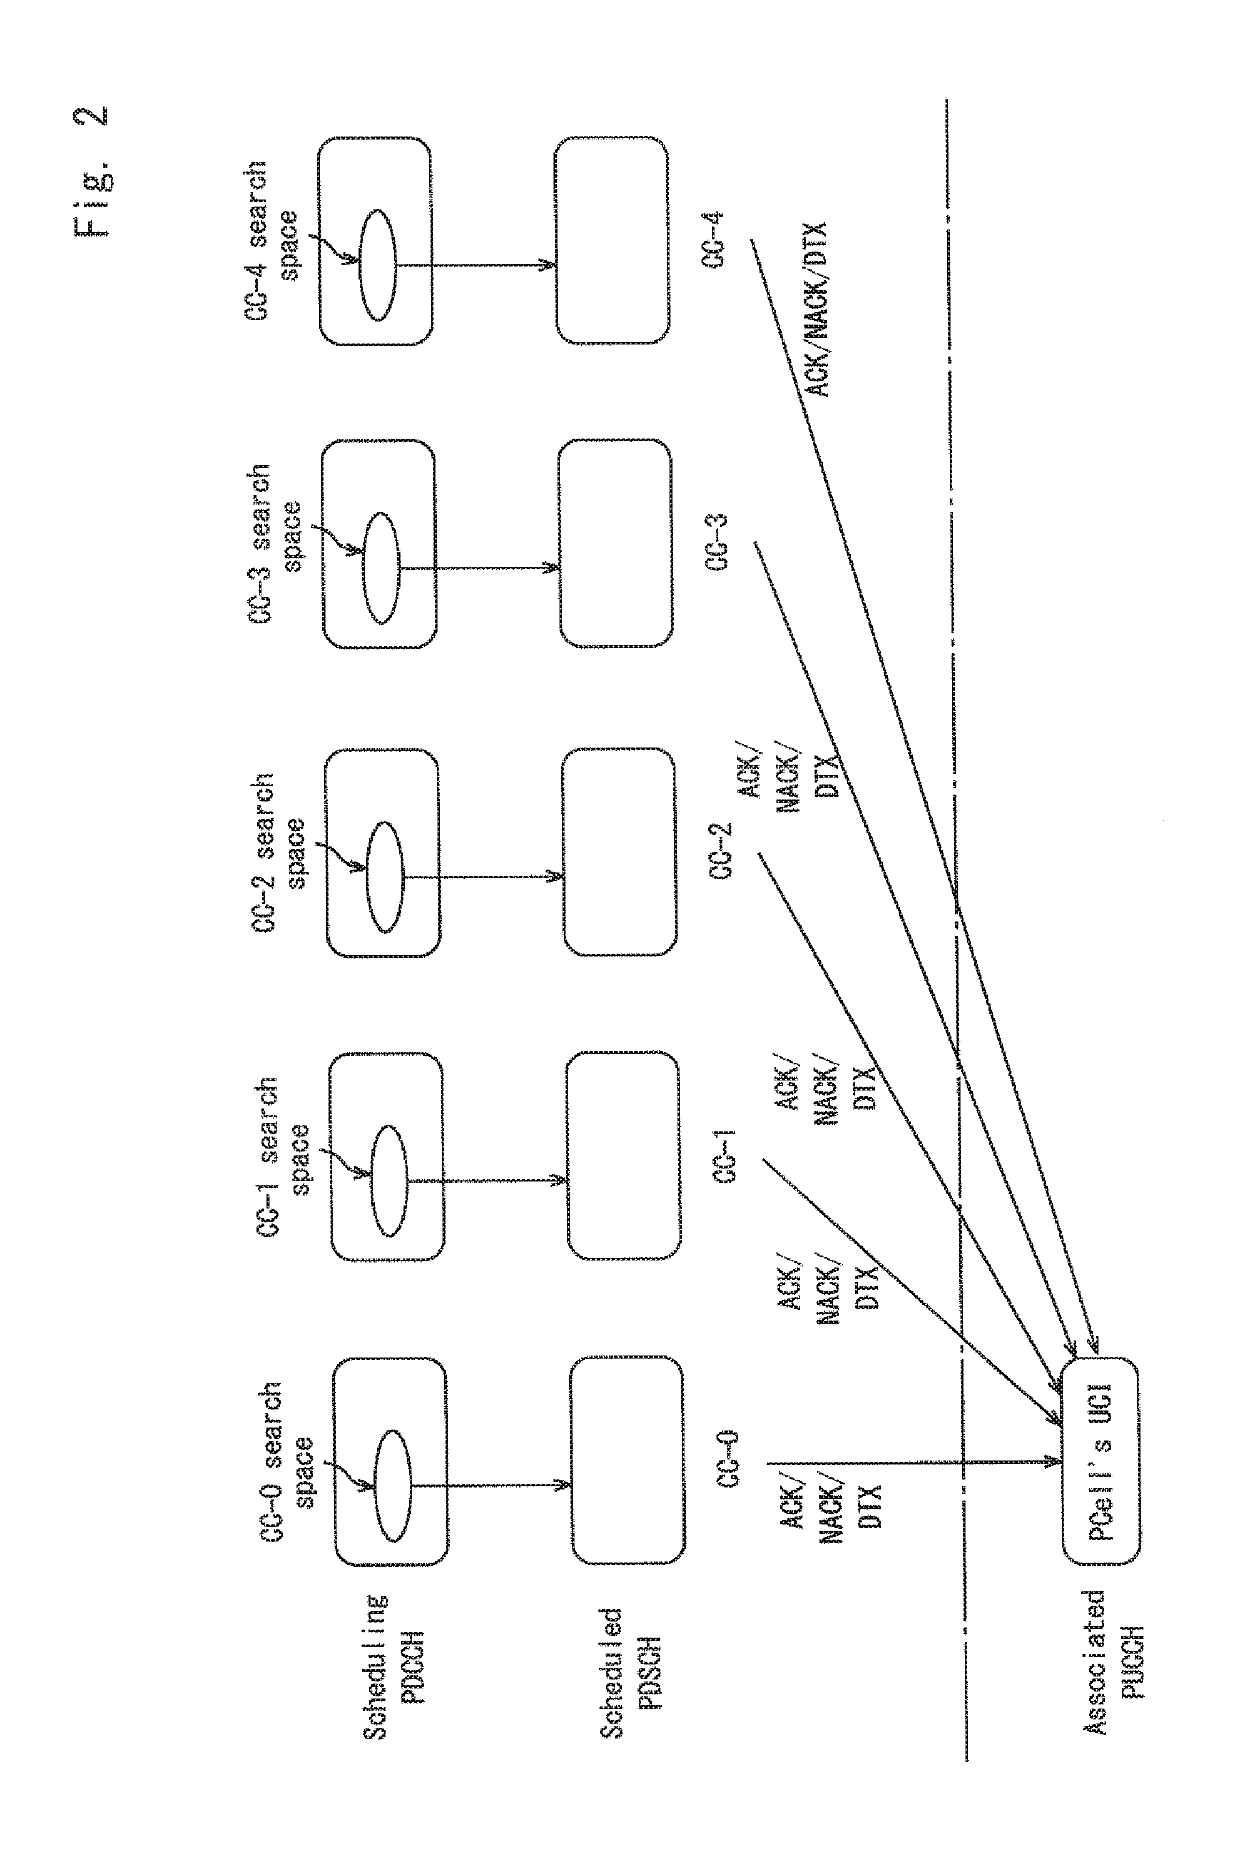 Method for realizing eCA supporting up to 32 CCs and enhancing dynamic PUCCH resource allocation for associated use